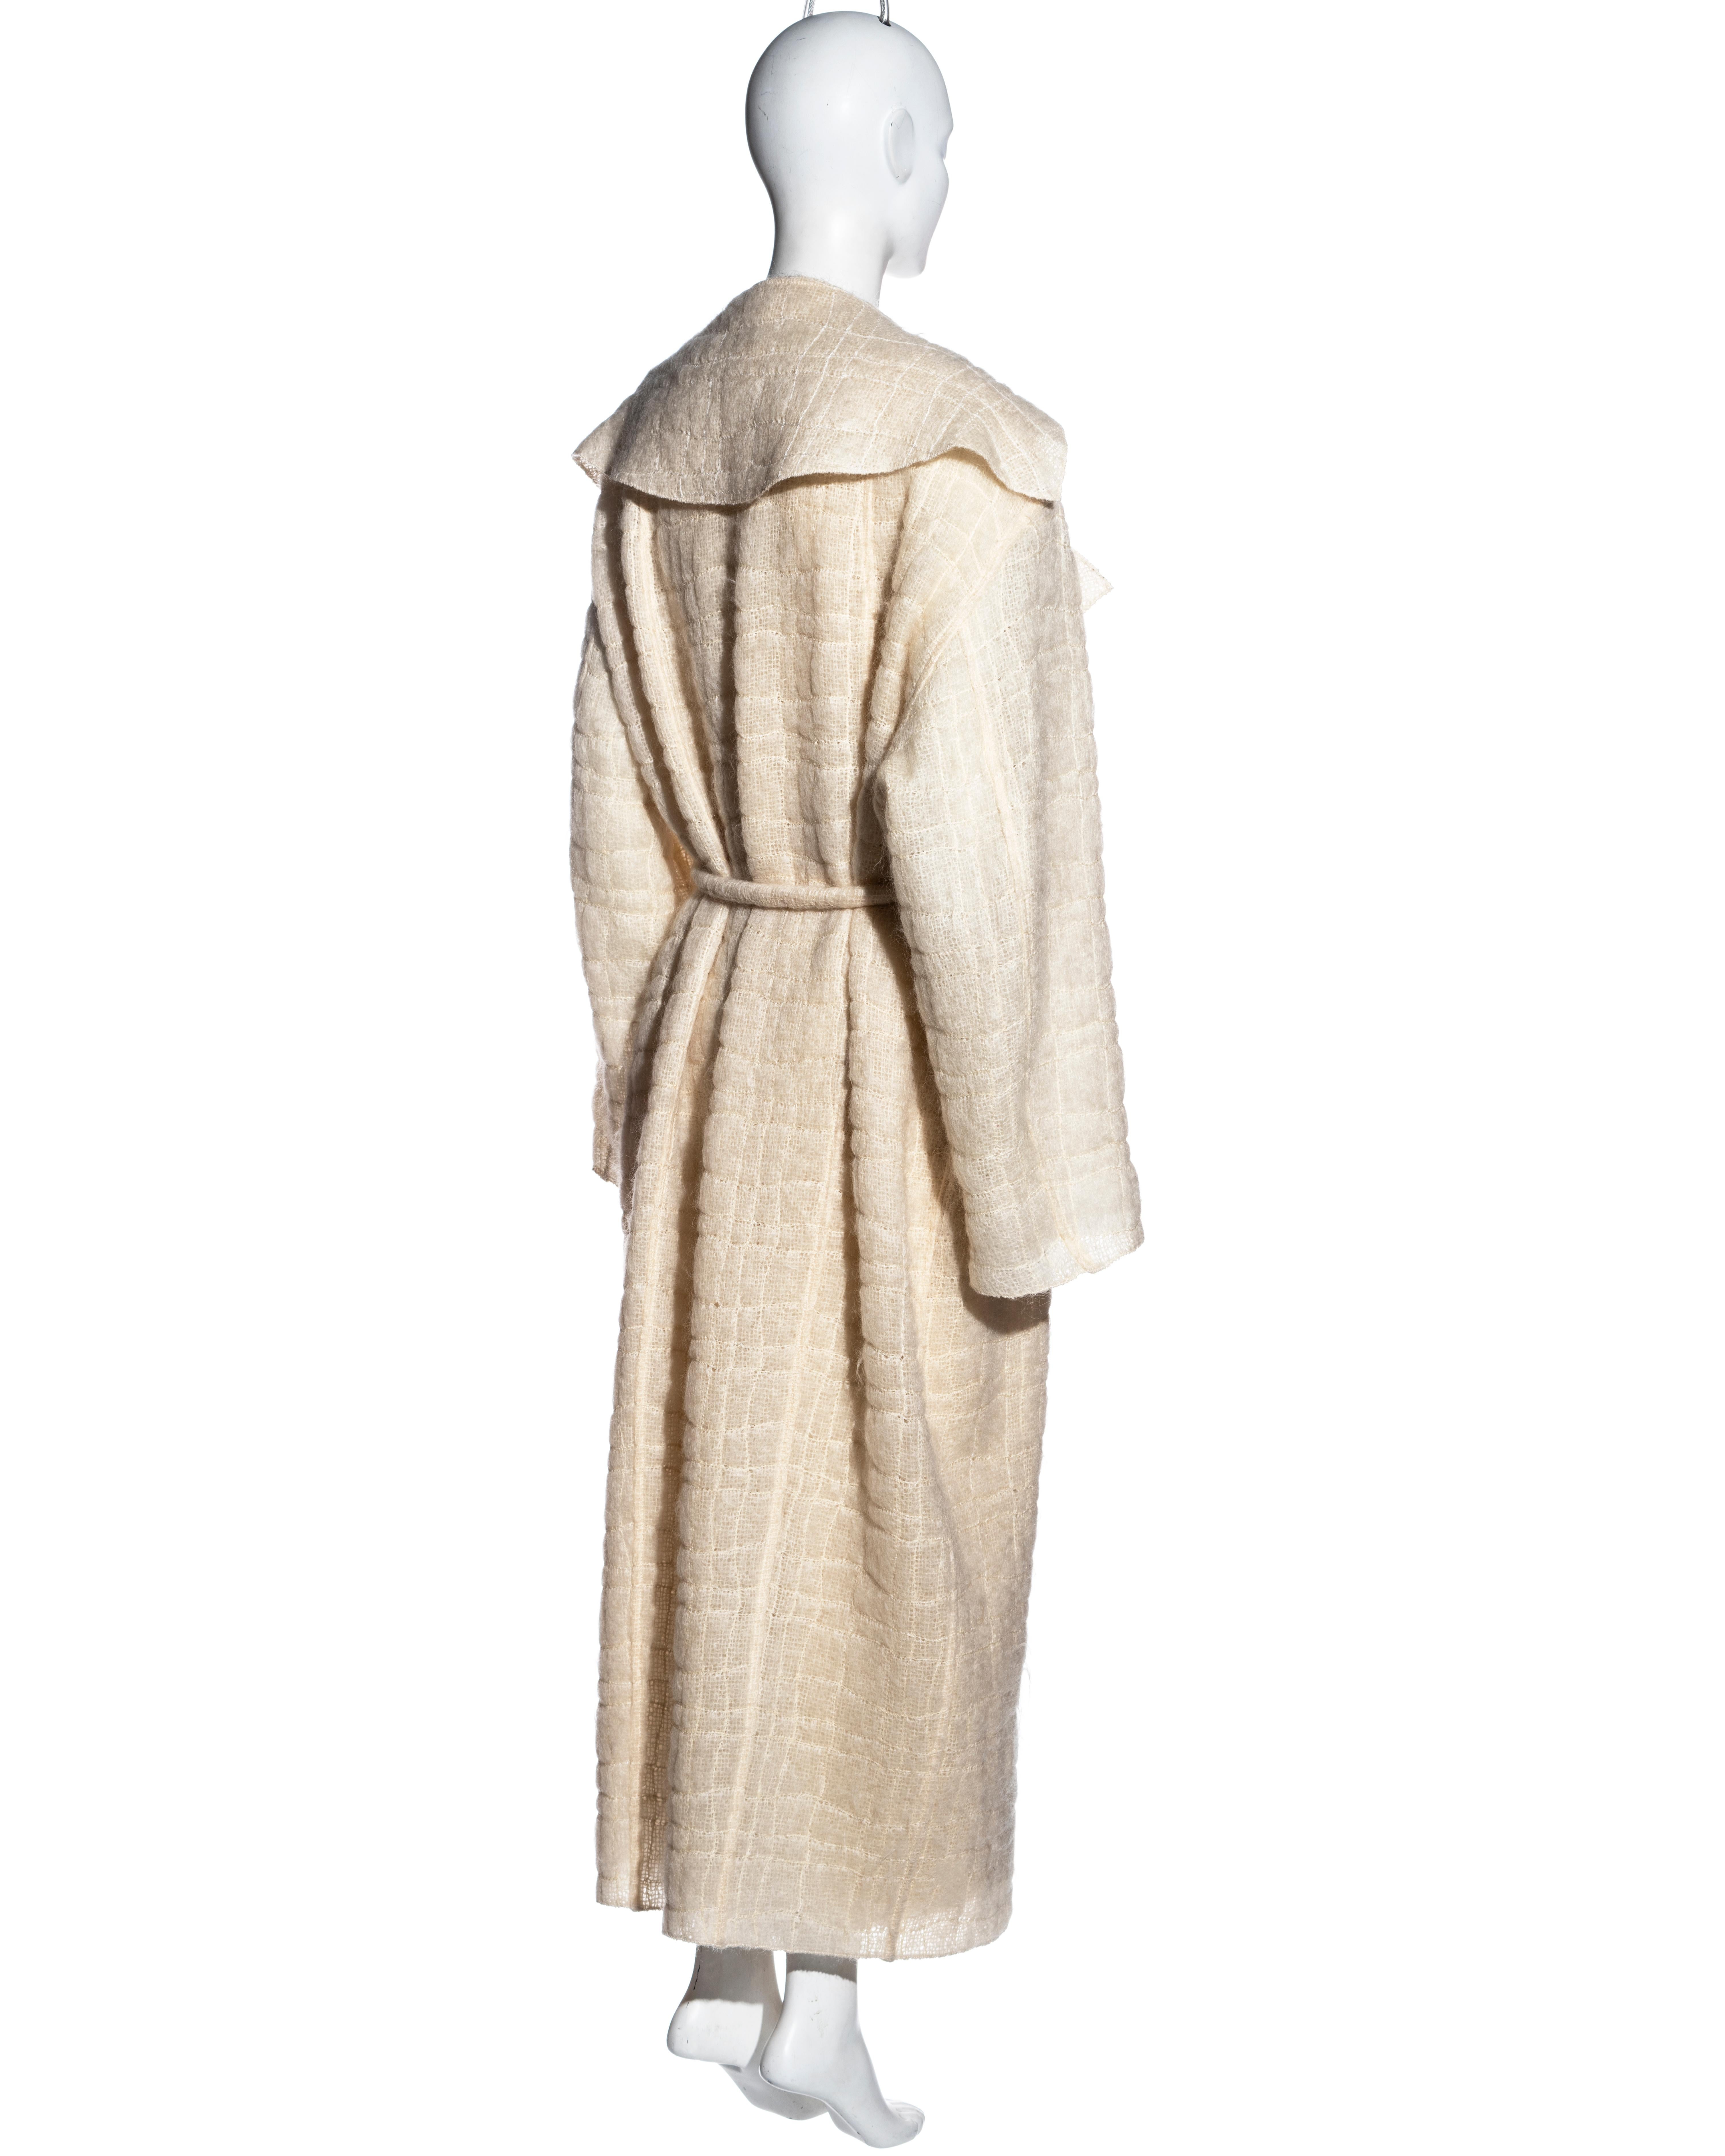 Chanel by Karl Lagerfeld cream mohair wool coat and dress ensemble, fw 1998 For Sale 3